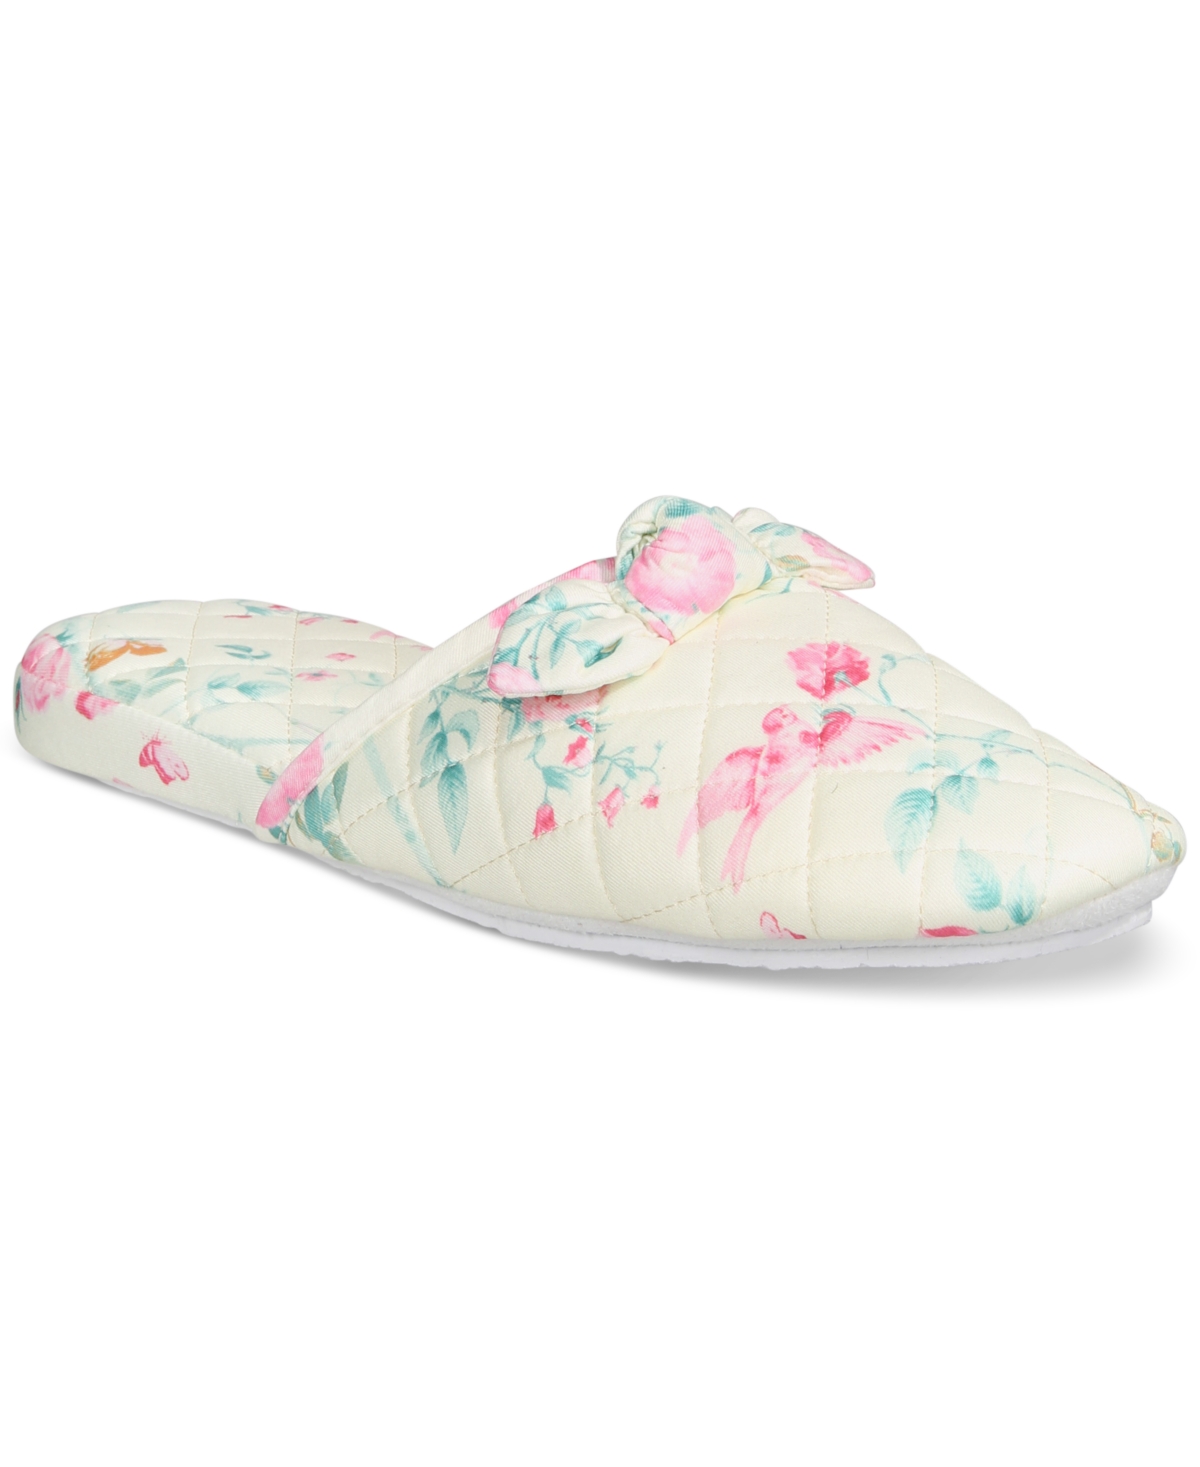 Women's Quilted Butterfly Floral Bow Slippers, Created for Macy's - Summer Moon